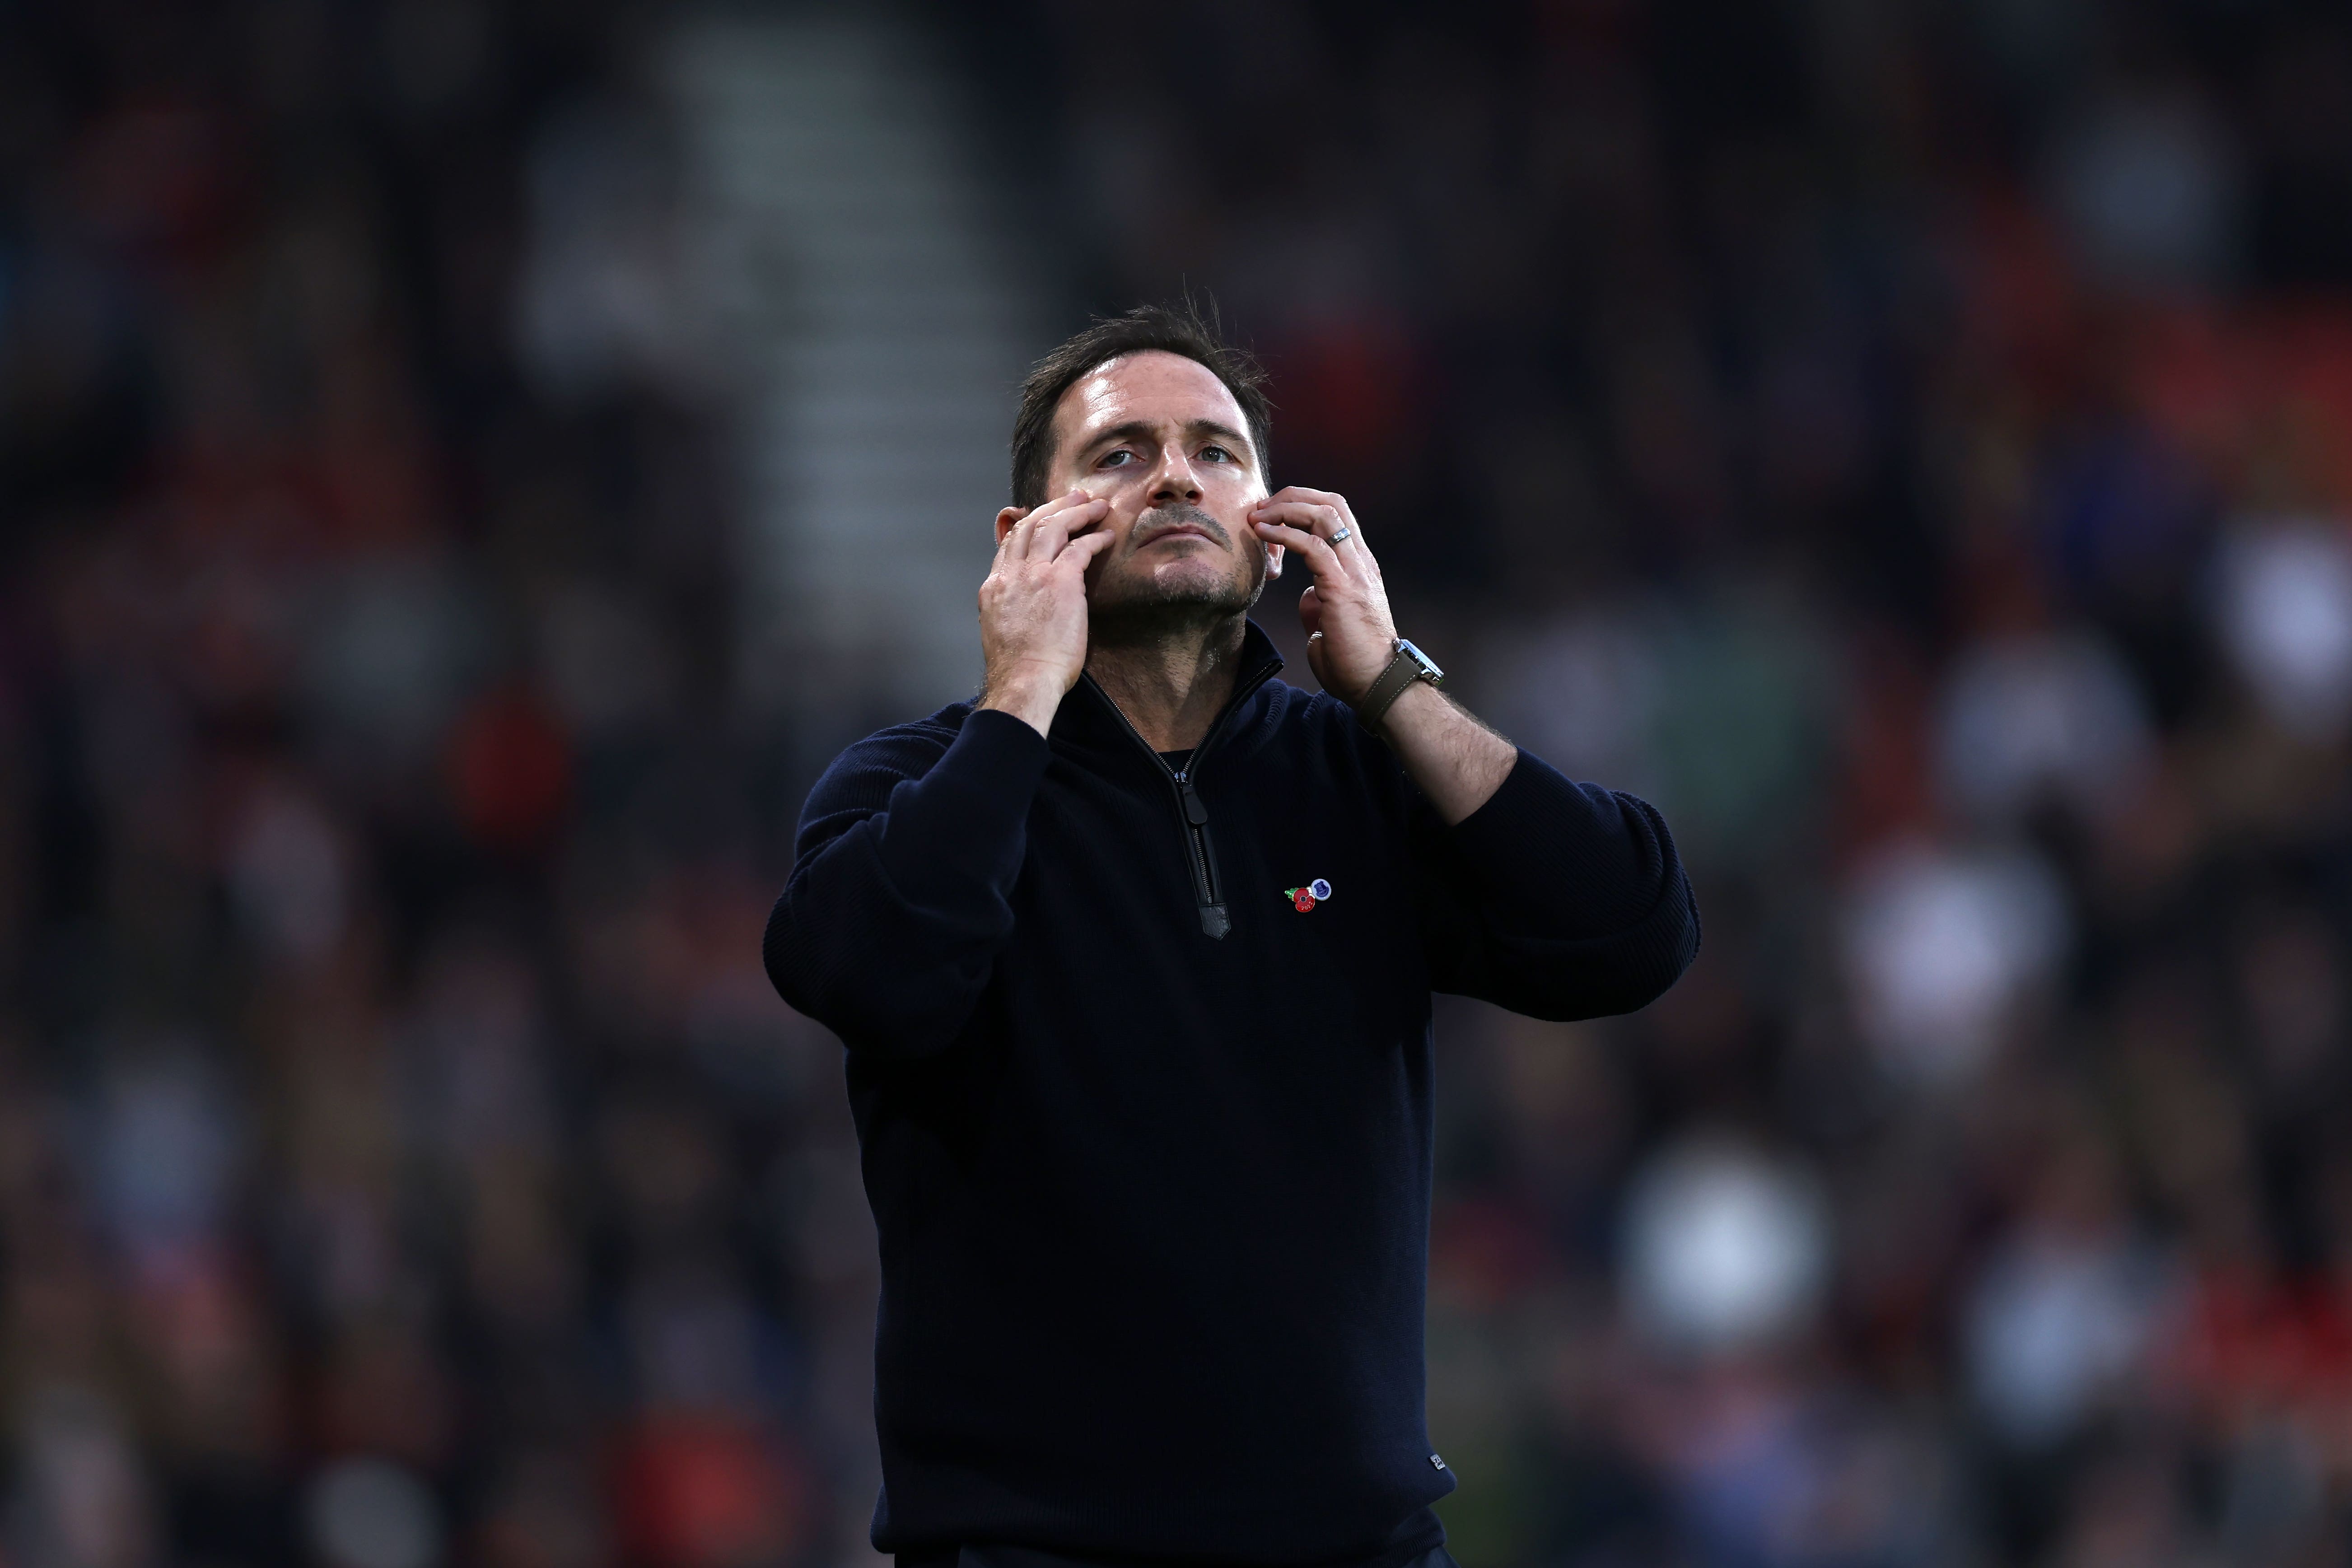 Frank Lampard has been sacked after less than a year in charge at Everton